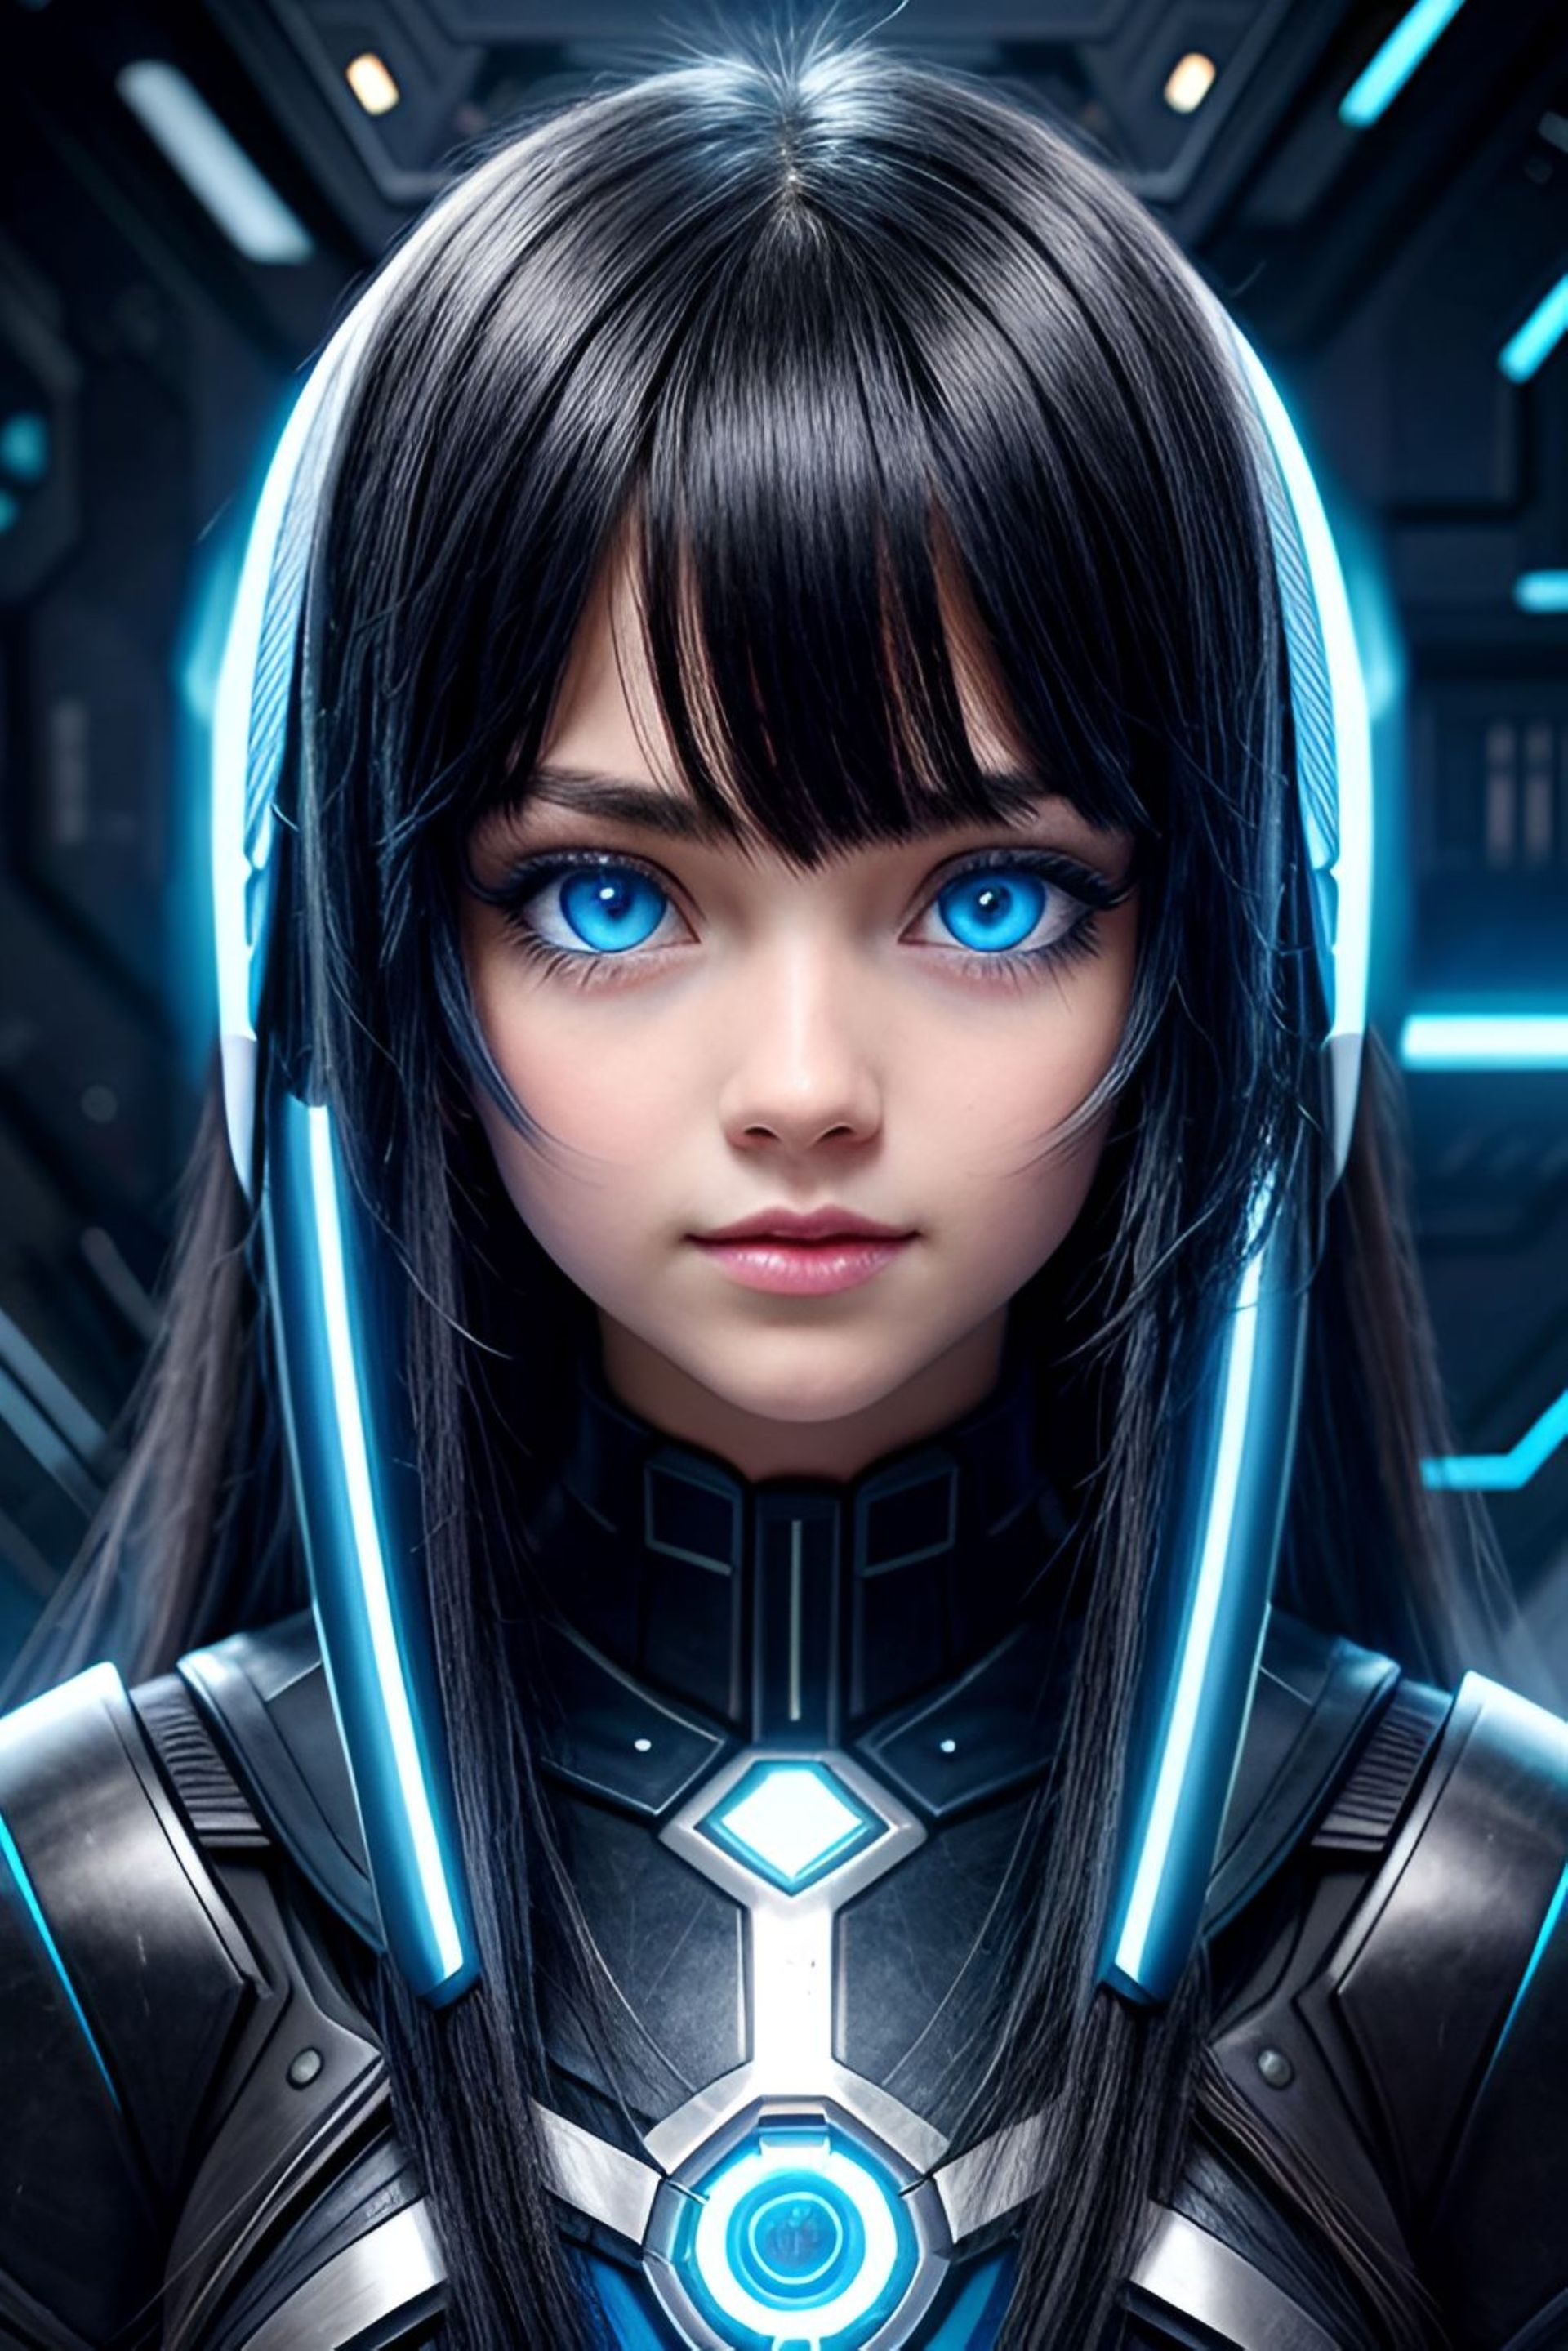 A girl, cyborg, with blue eyes, wearing power armor.